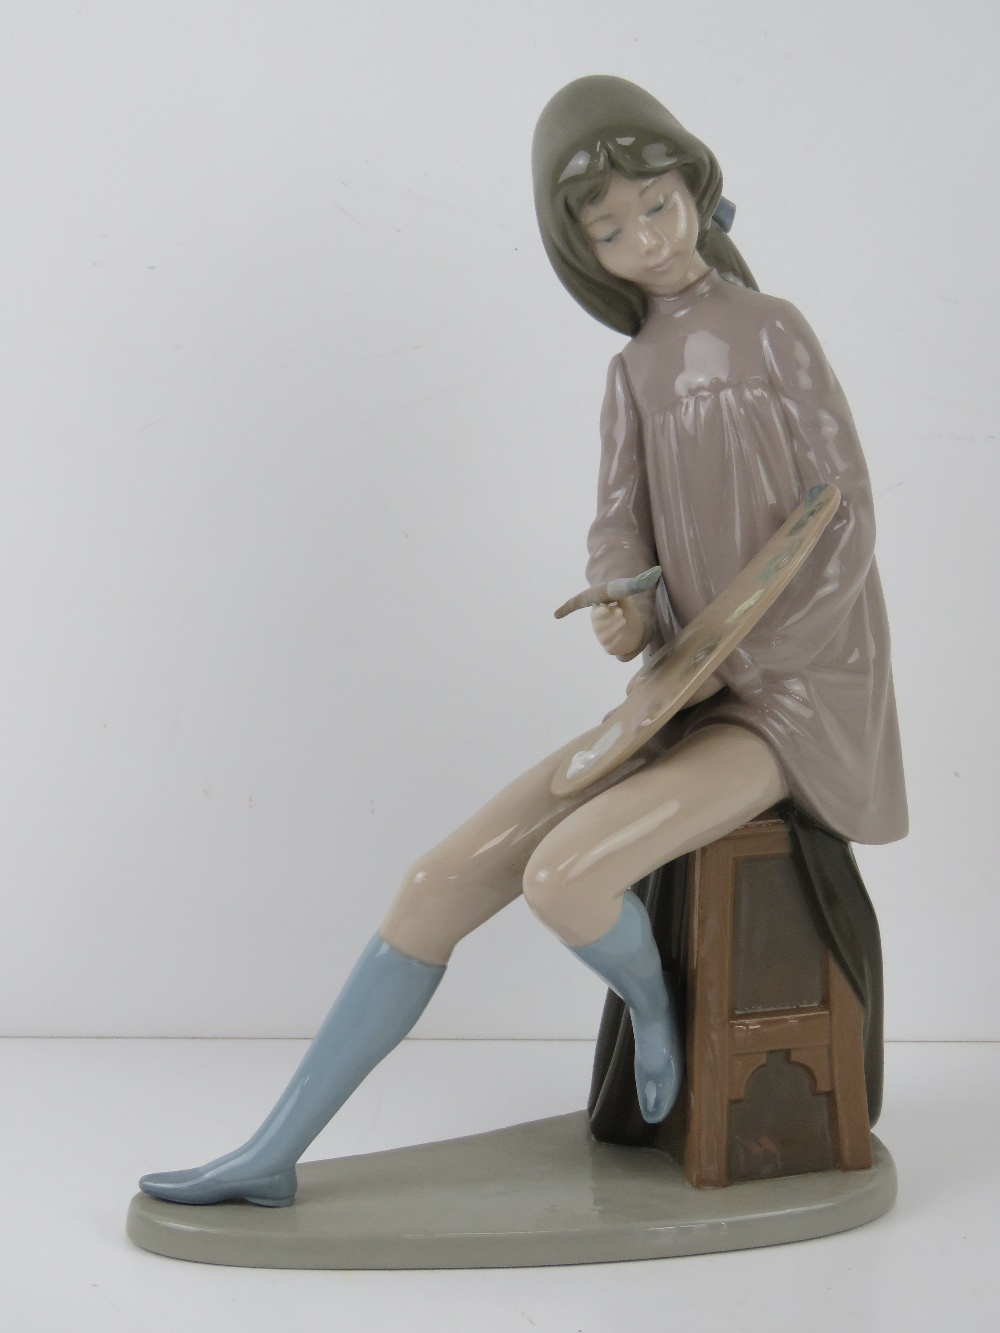 Nao figurine of a girl with artists palette and paintbrush (loose), 31.5cm high.